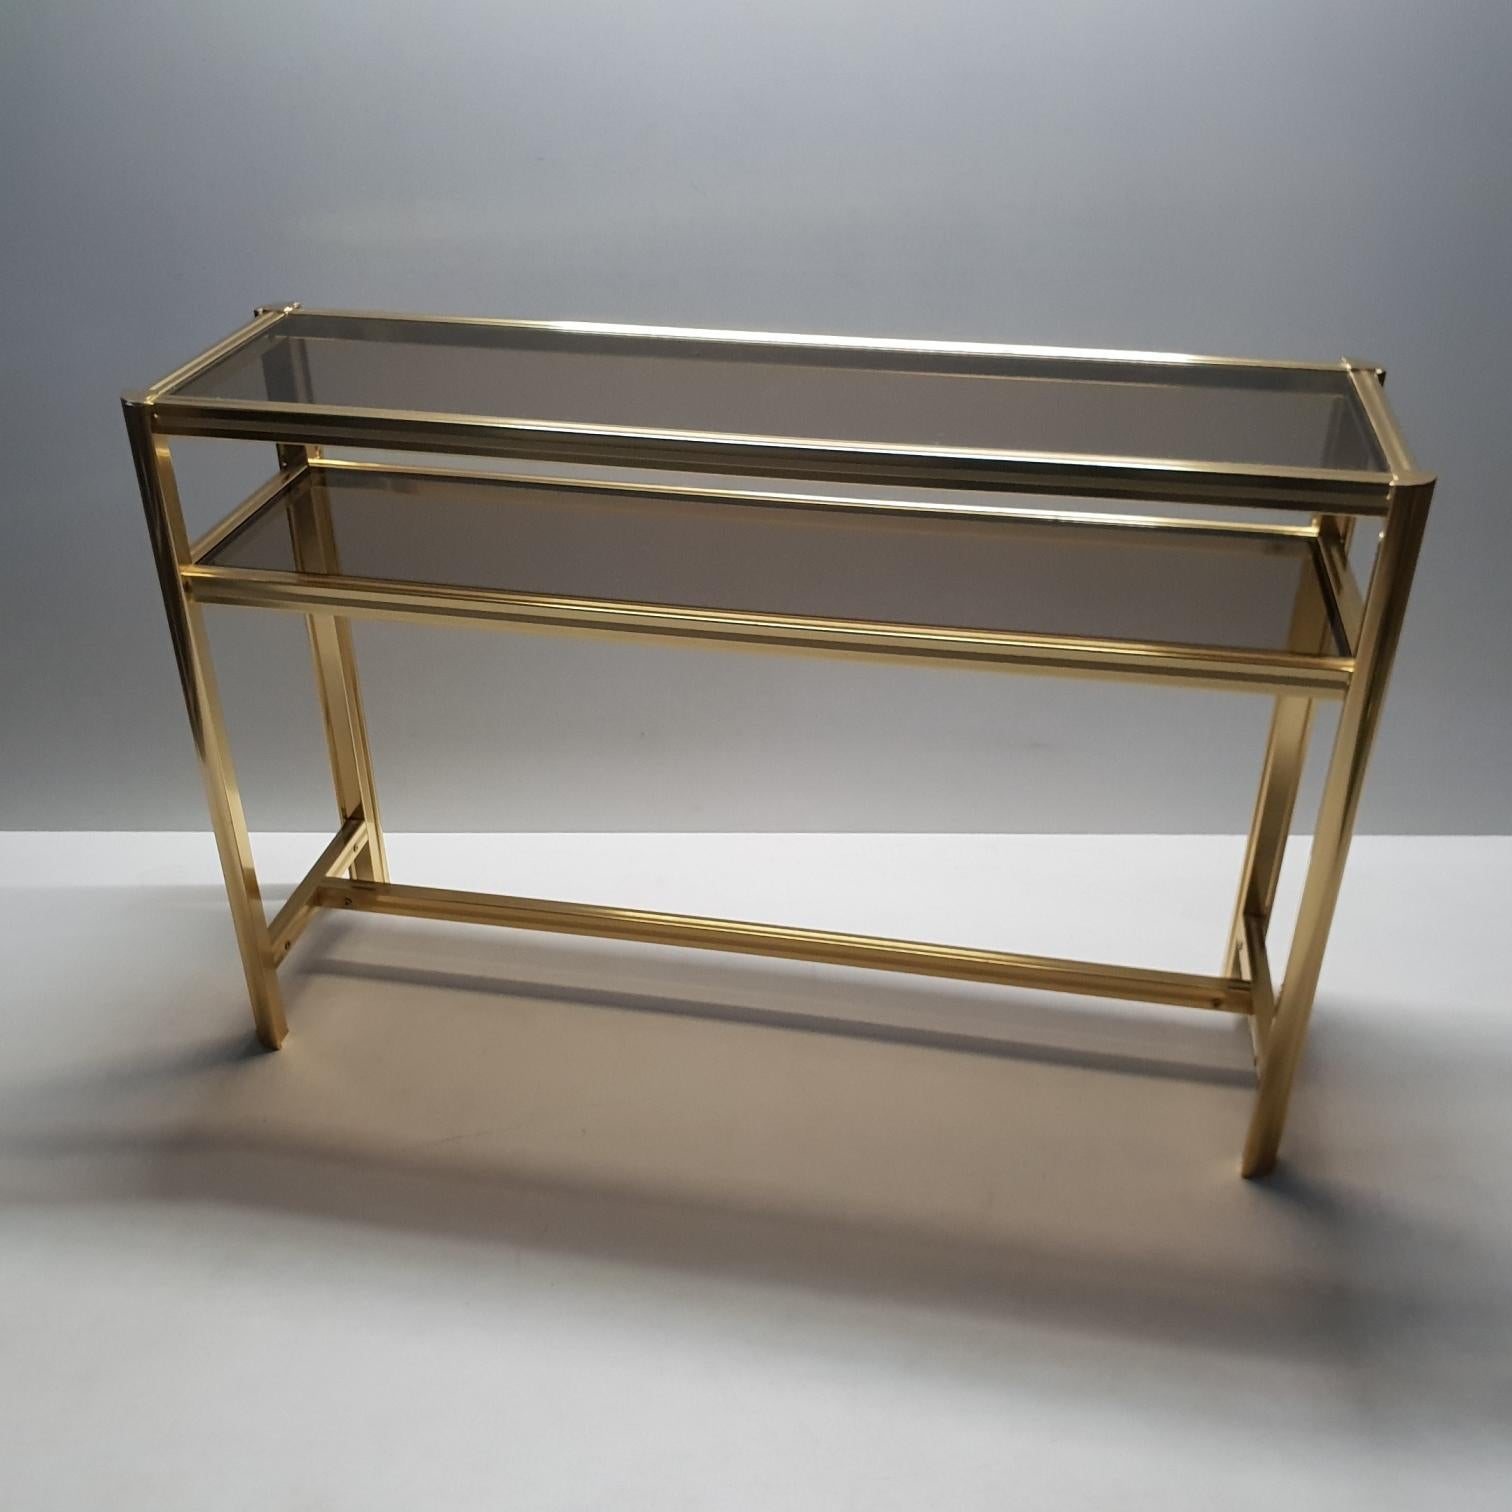 Italian Modern Gilt Brass Two Tiers Side Table with Smoked Glass, 1980s For Sale 2